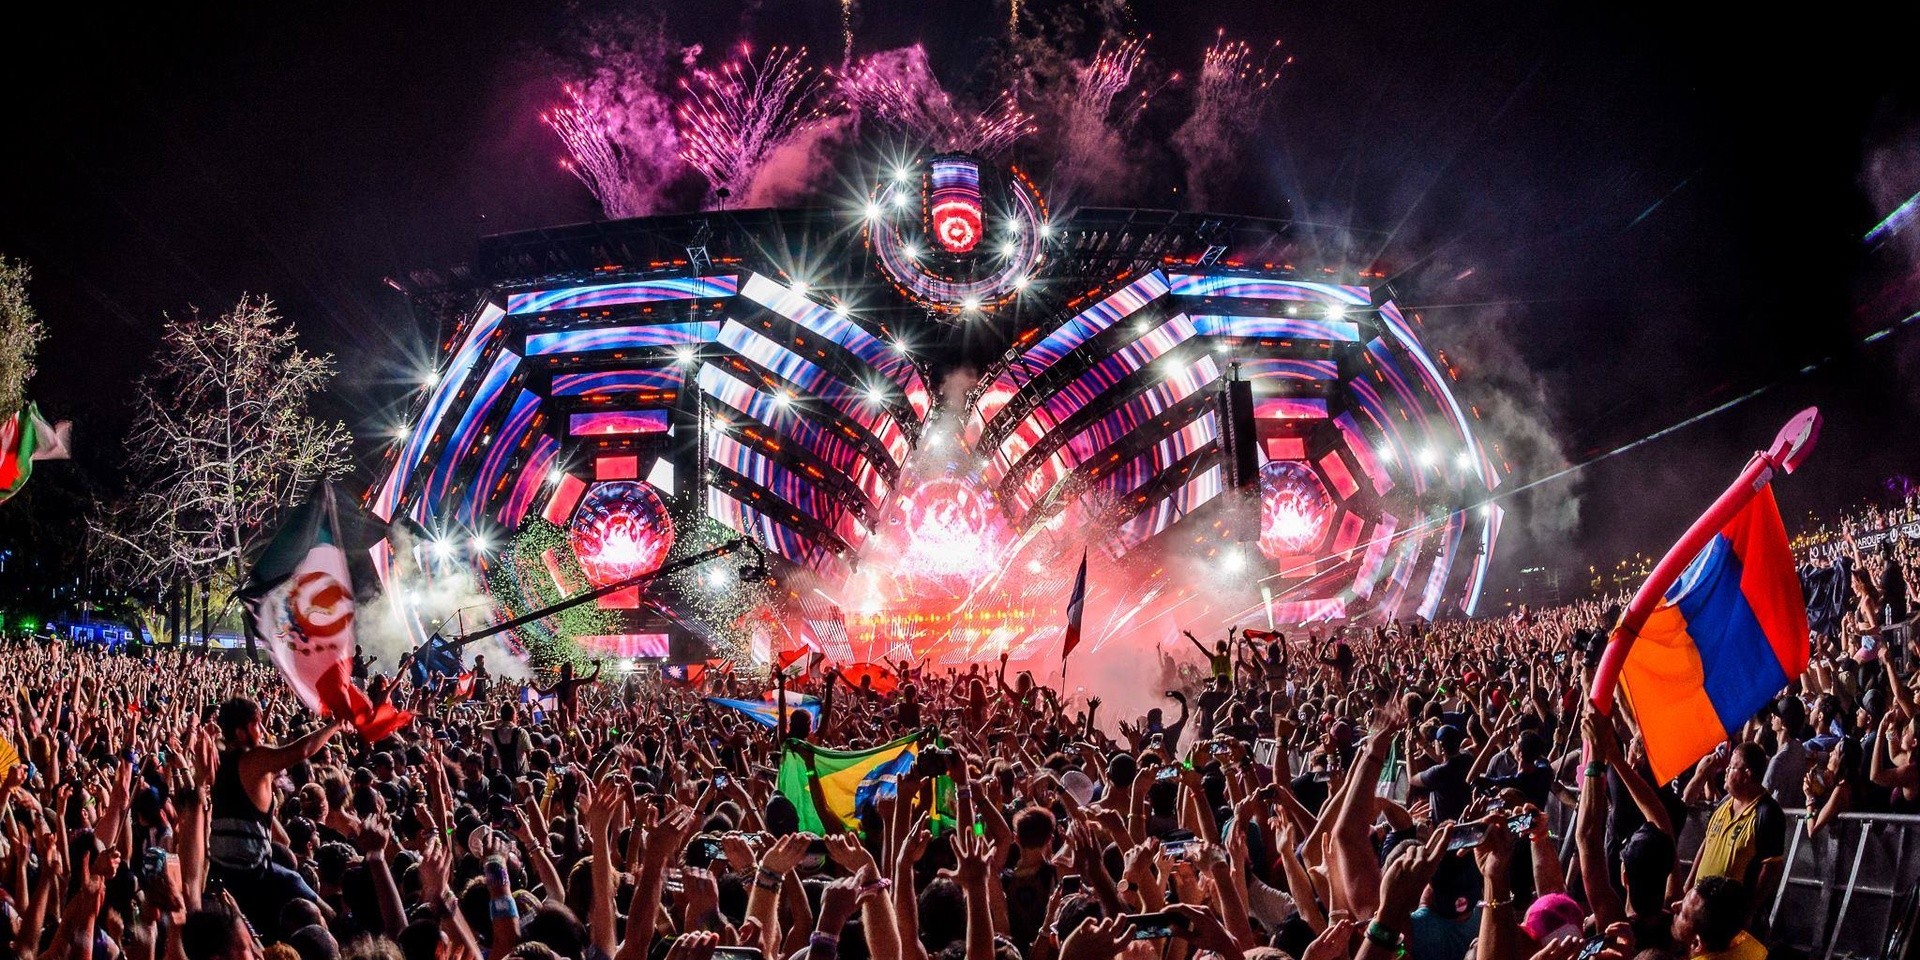 You'll be able to watch Ultra Singapore at home this weekend